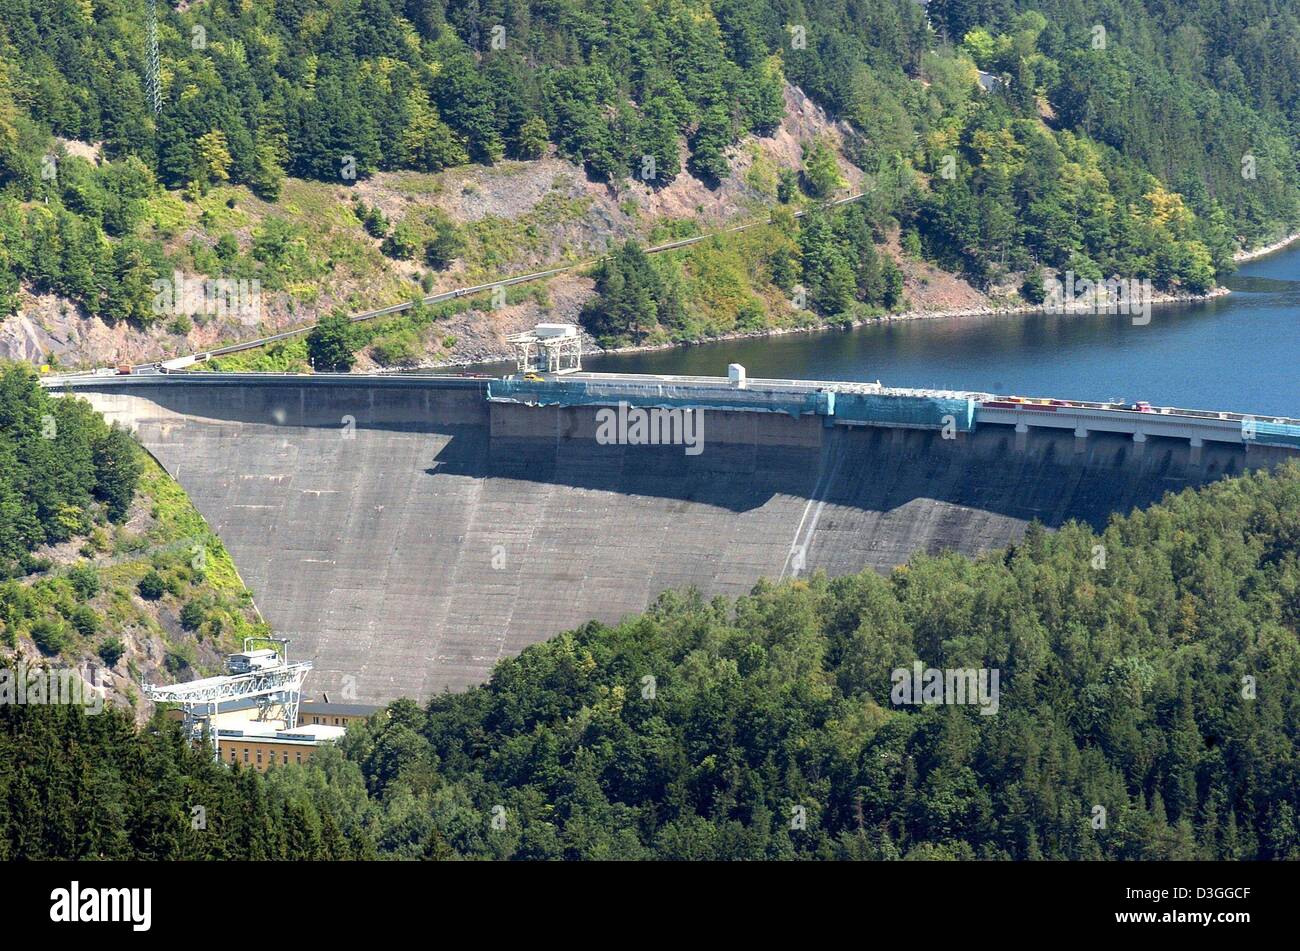 (dpa) - A view of the Hohenwarte dam on the Saale River near Saalfeld, Germany, 10 August 2004. The dam, erected in 1941, is currently being restored and receives a new walldeck. Construction of the dam started in 1936, it has a height of 75 m and the walldeck is 412 m long. Stock Photo